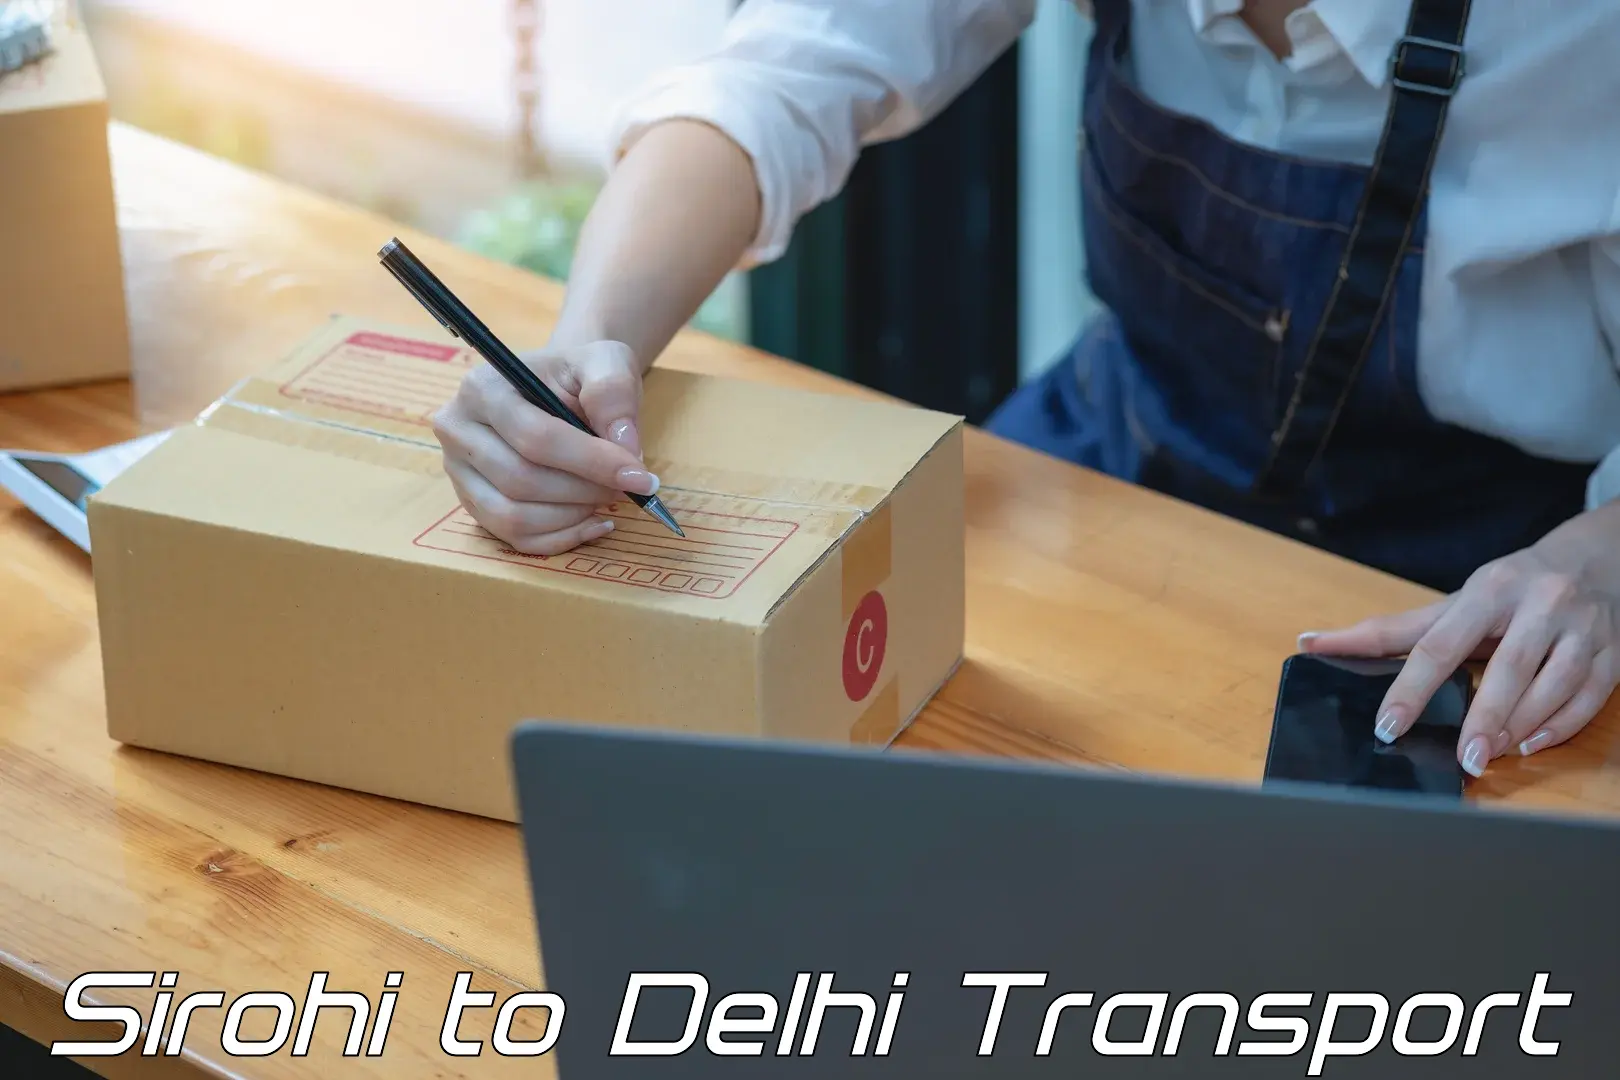 Container transport service Sirohi to University of Delhi